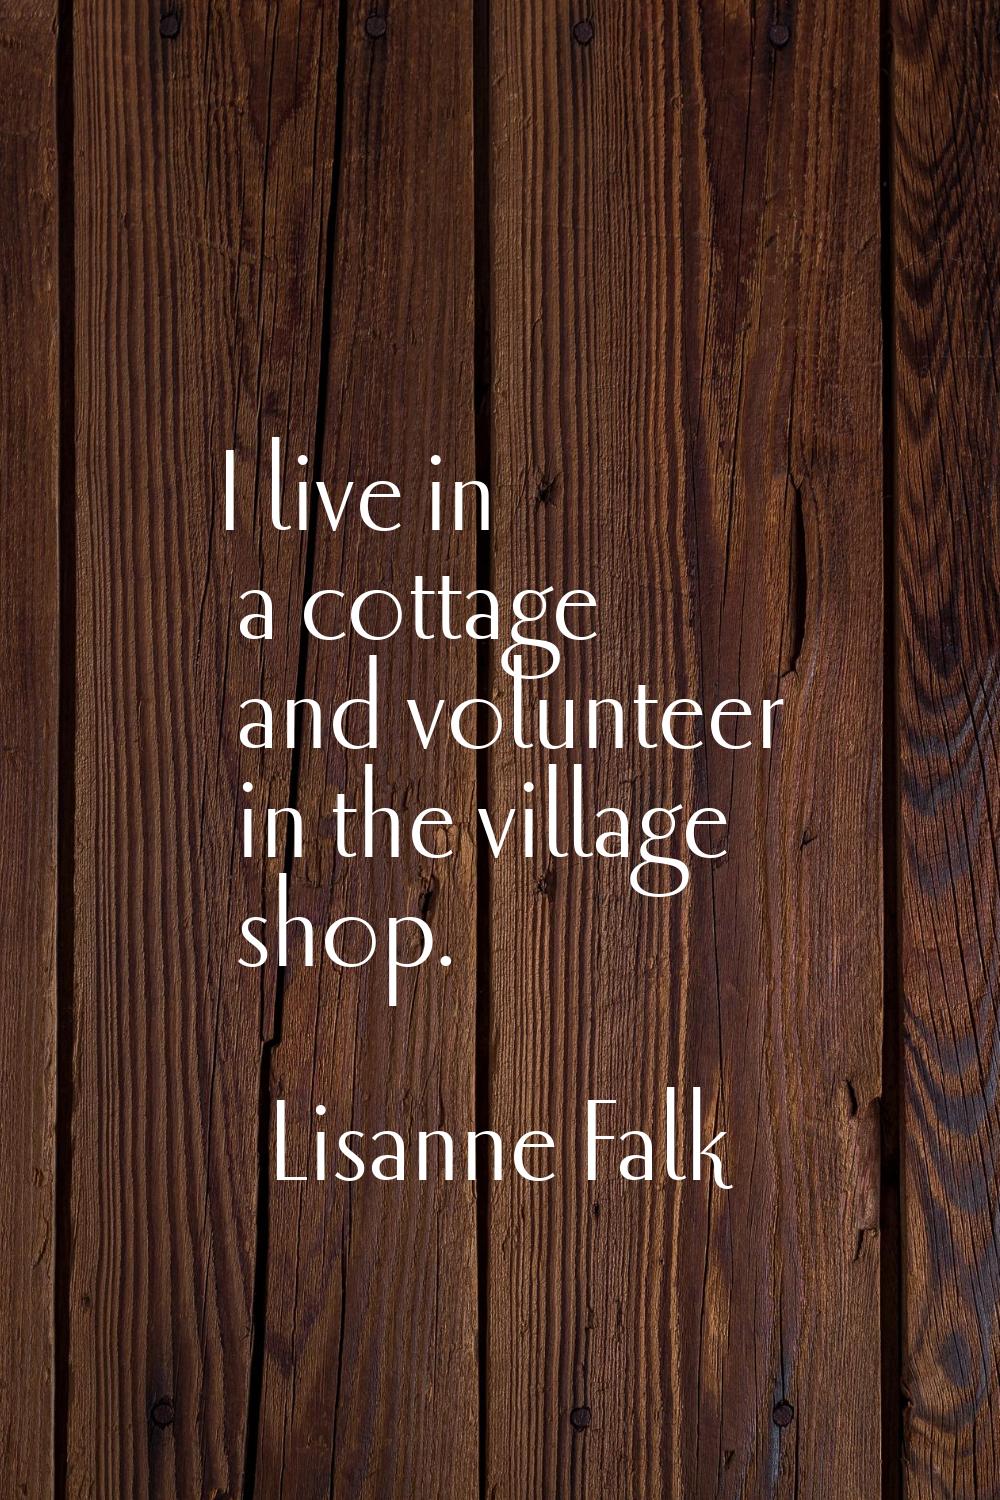 I live in a cottage and volunteer in the village shop.